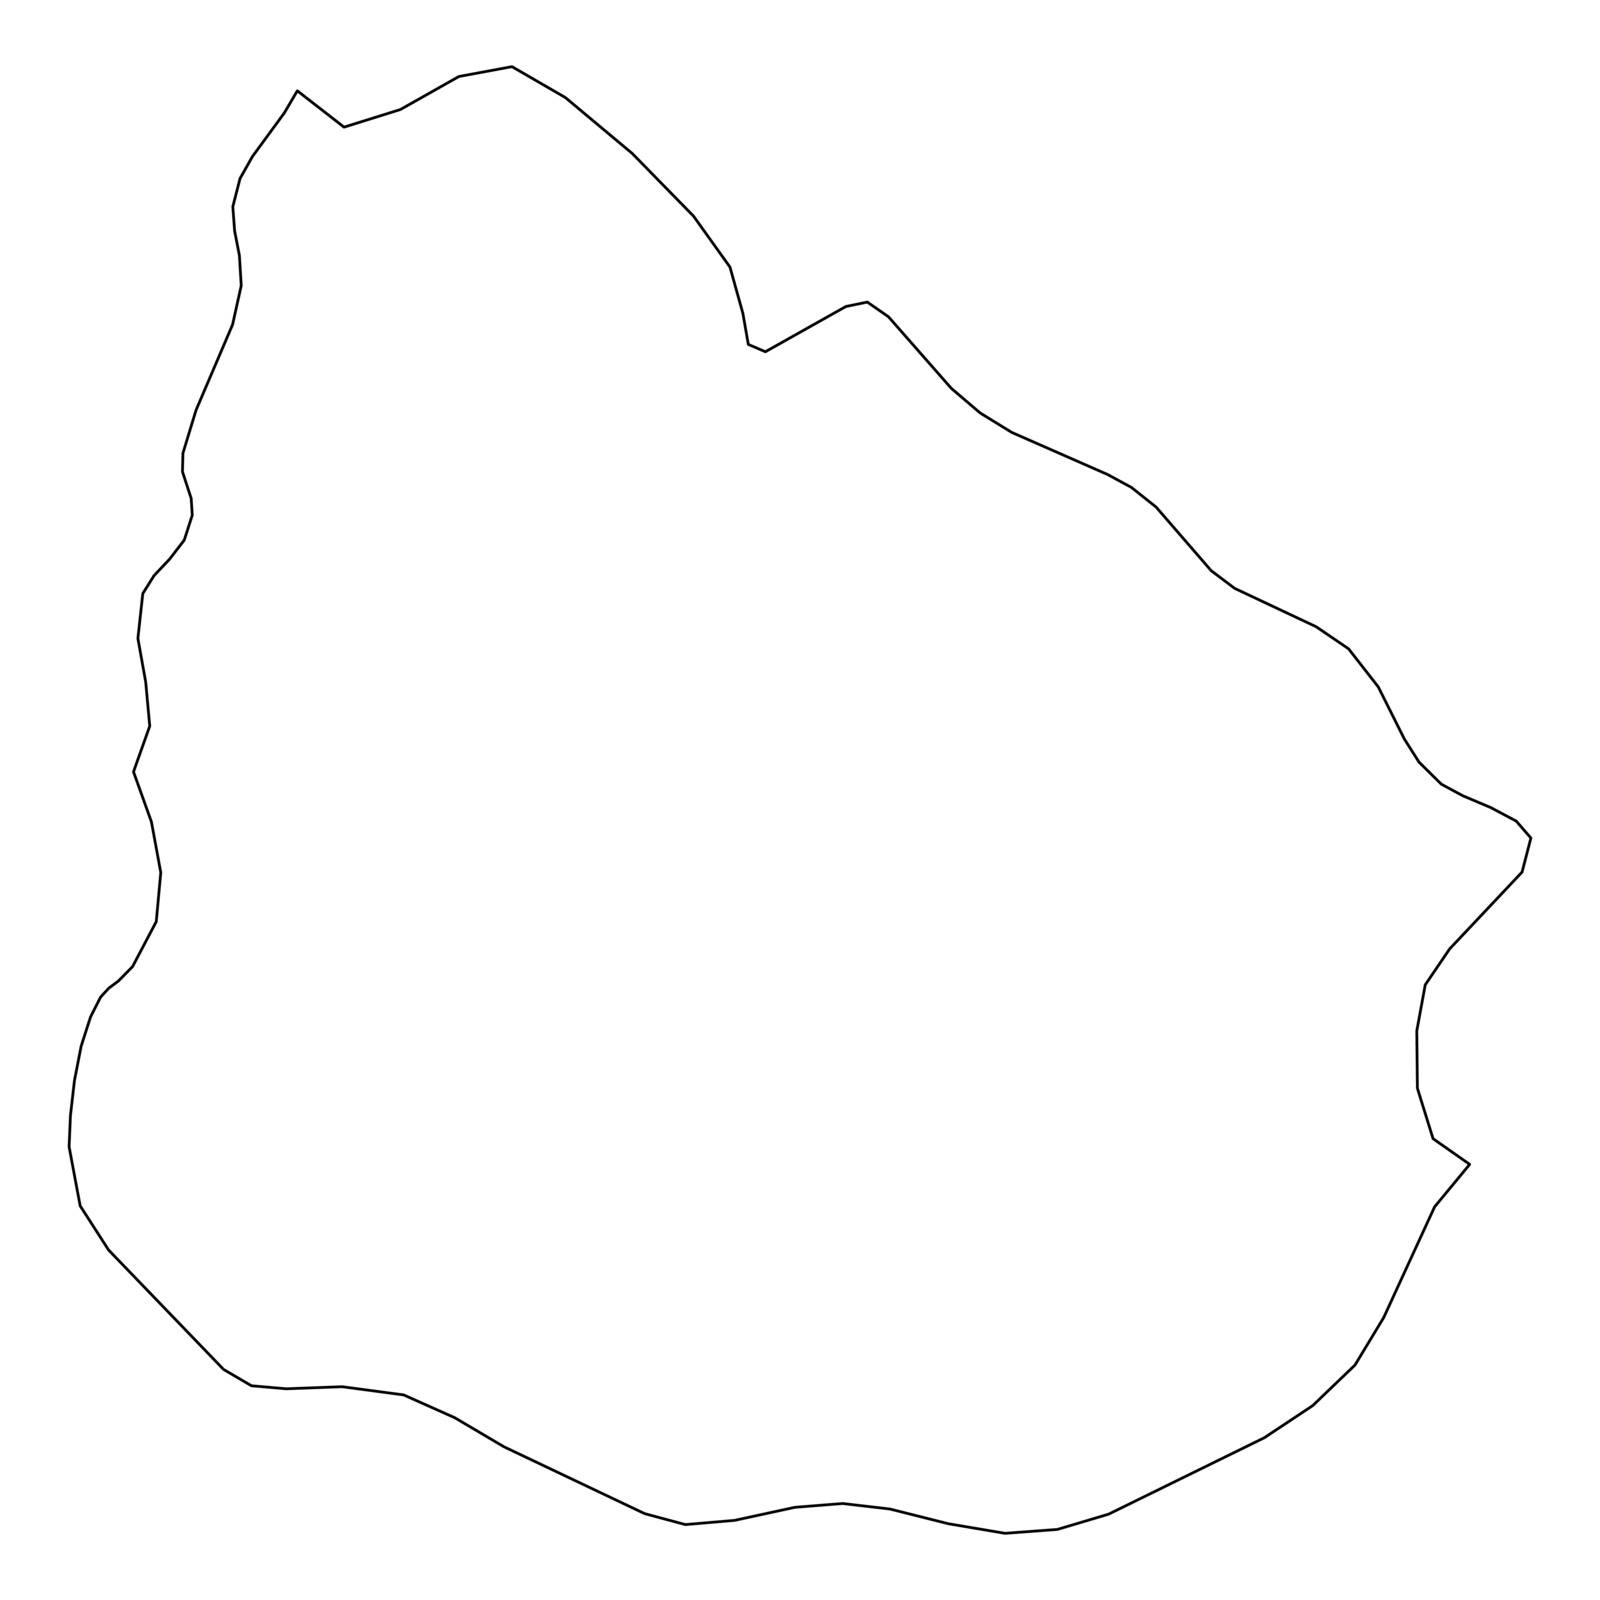 Uruguay - solid black outline border map of country area. Simple flat vector illustration by pyty